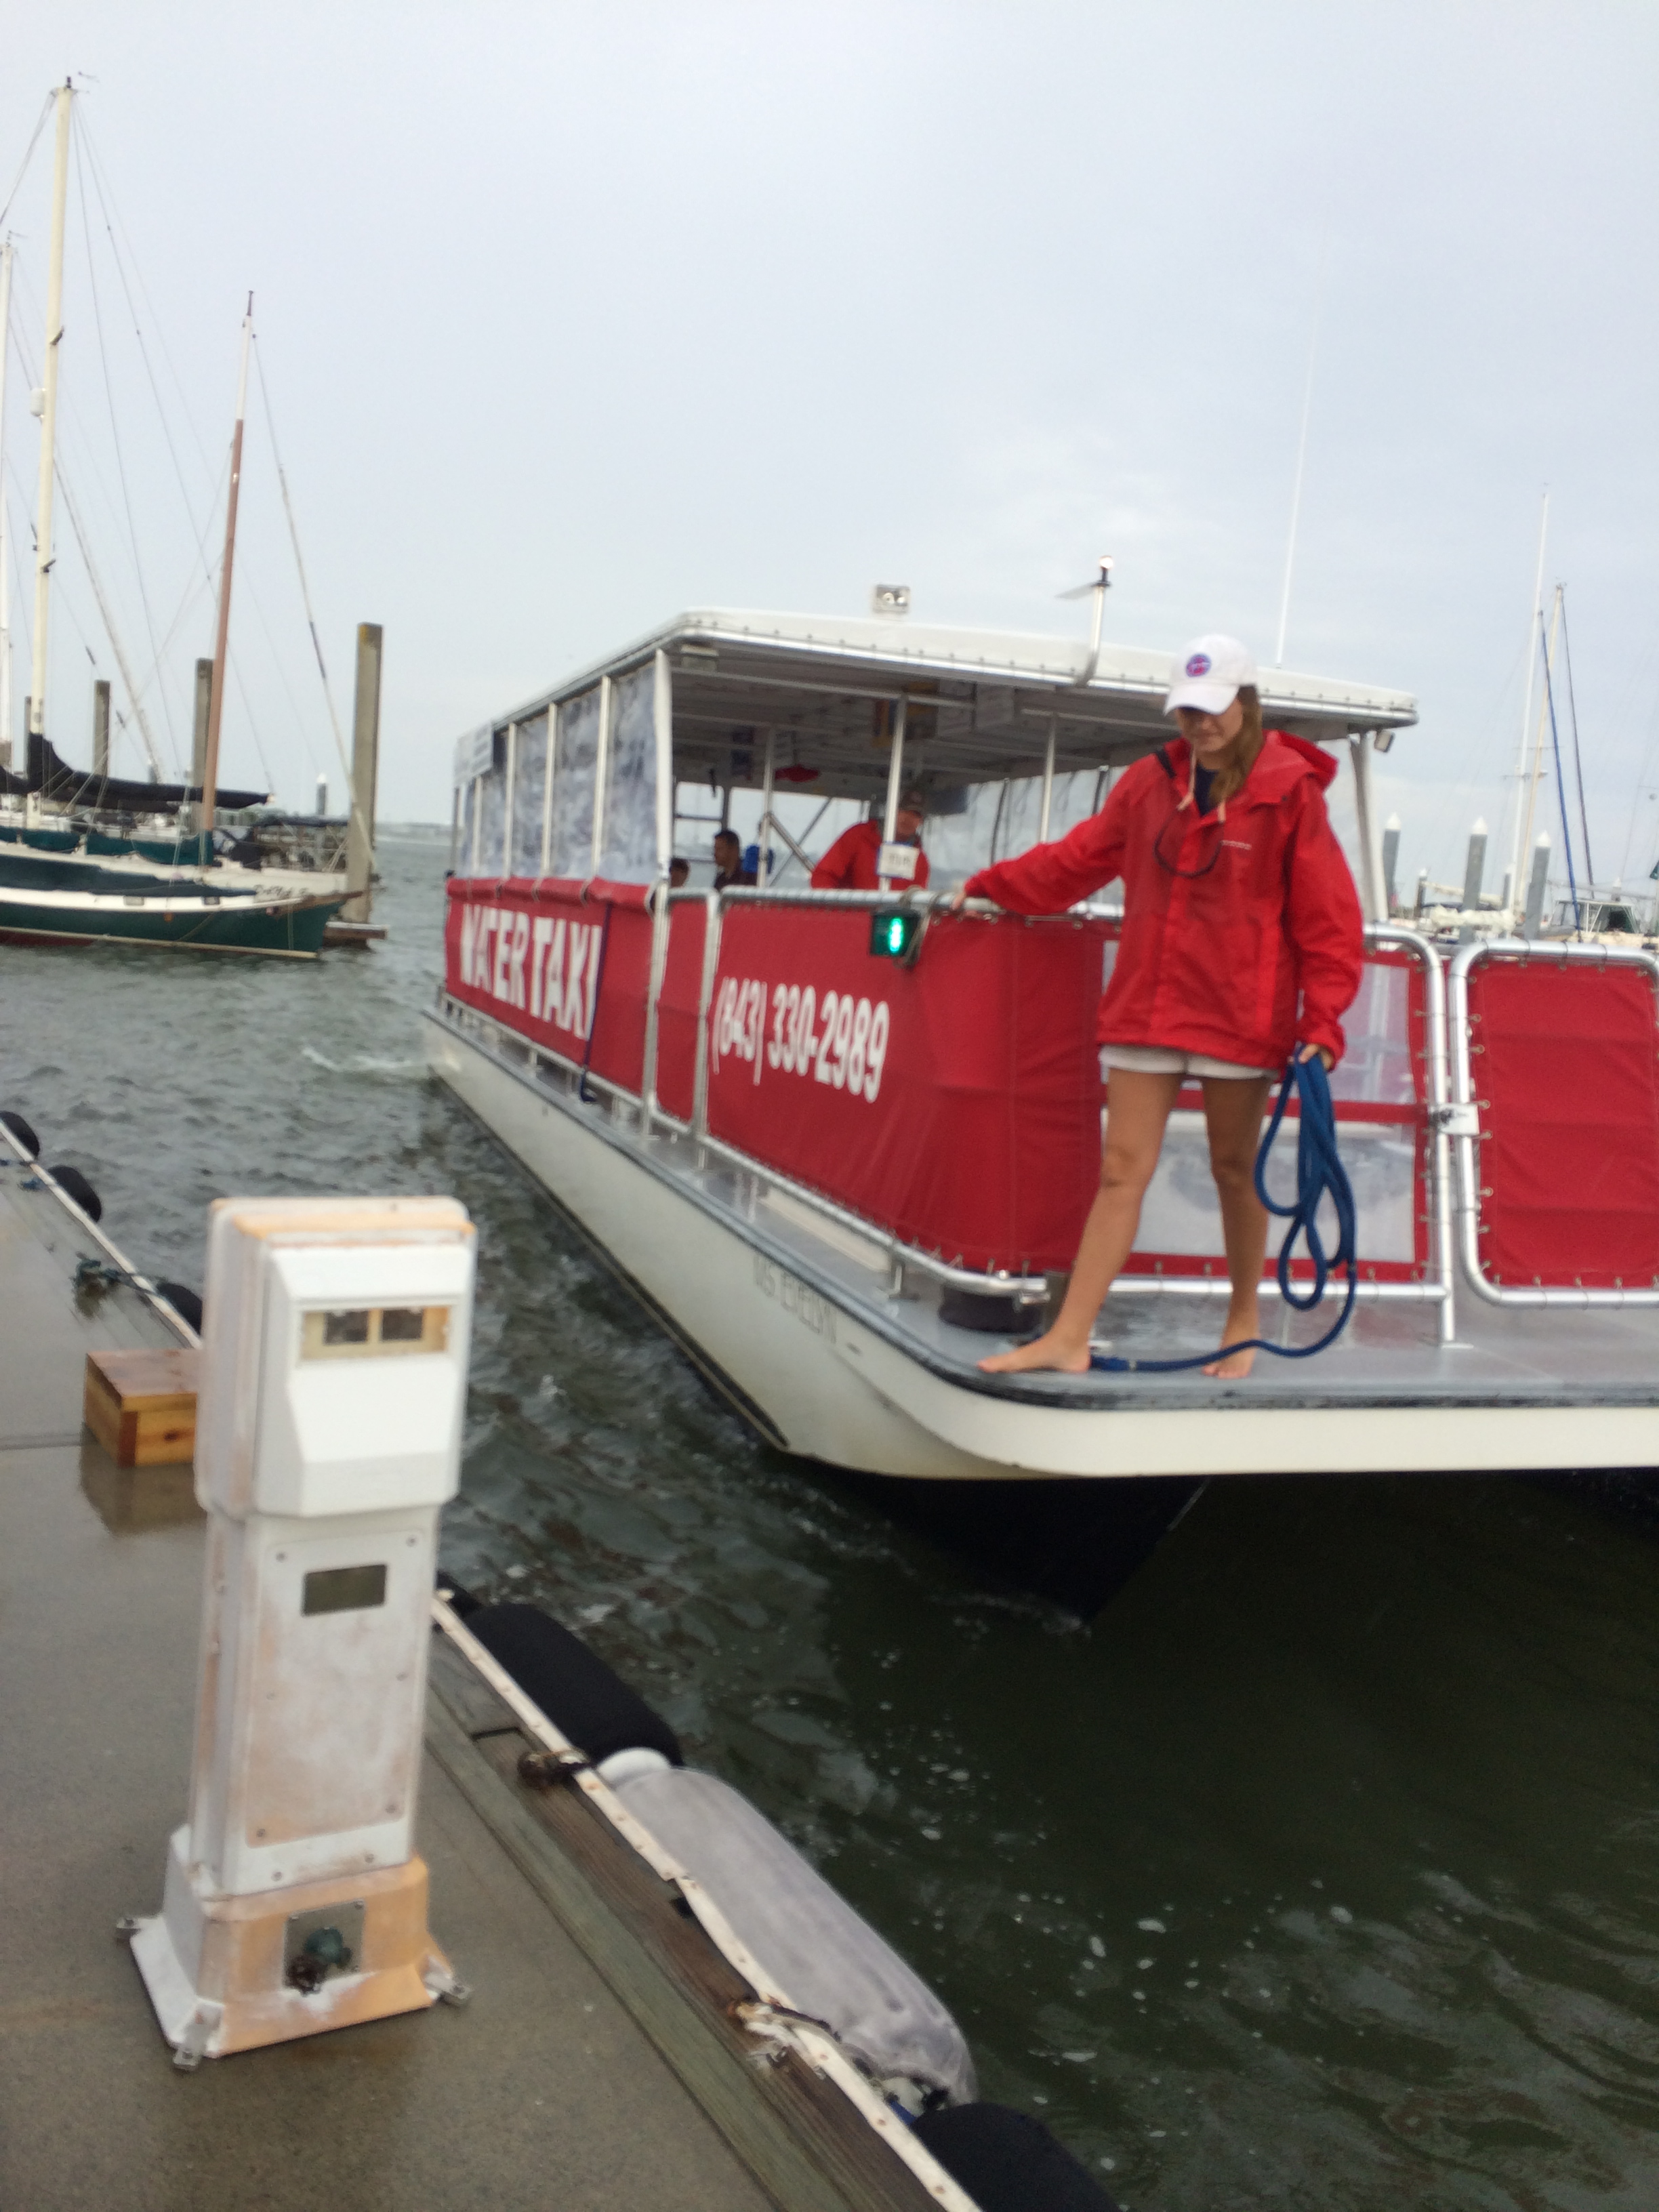 We used a water taxi to help us get around Charleston.